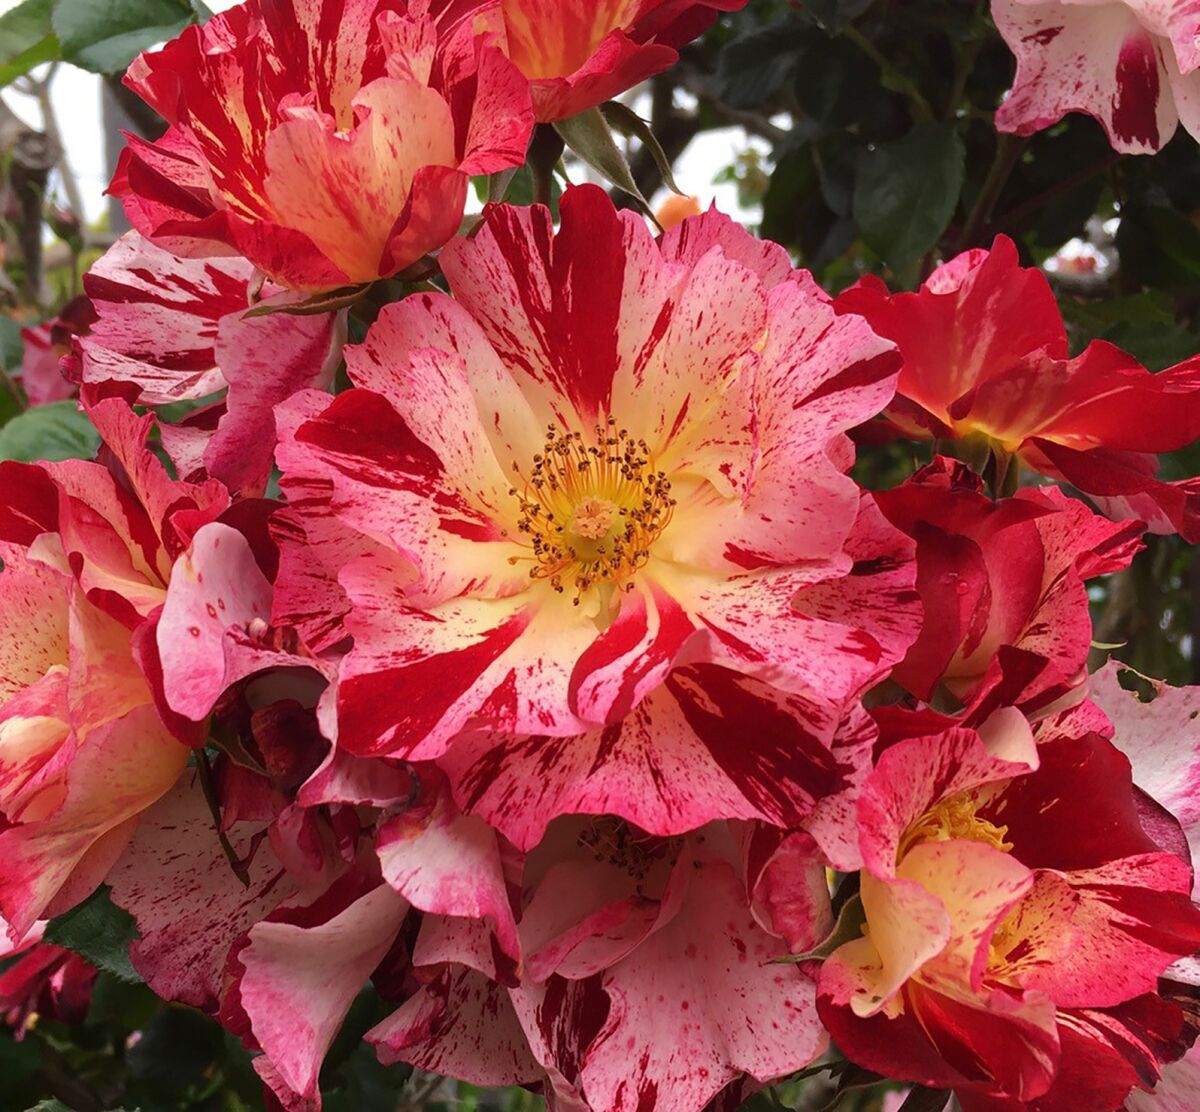 The red and white striped ‘Fourth of July’ rose is a definite climber.